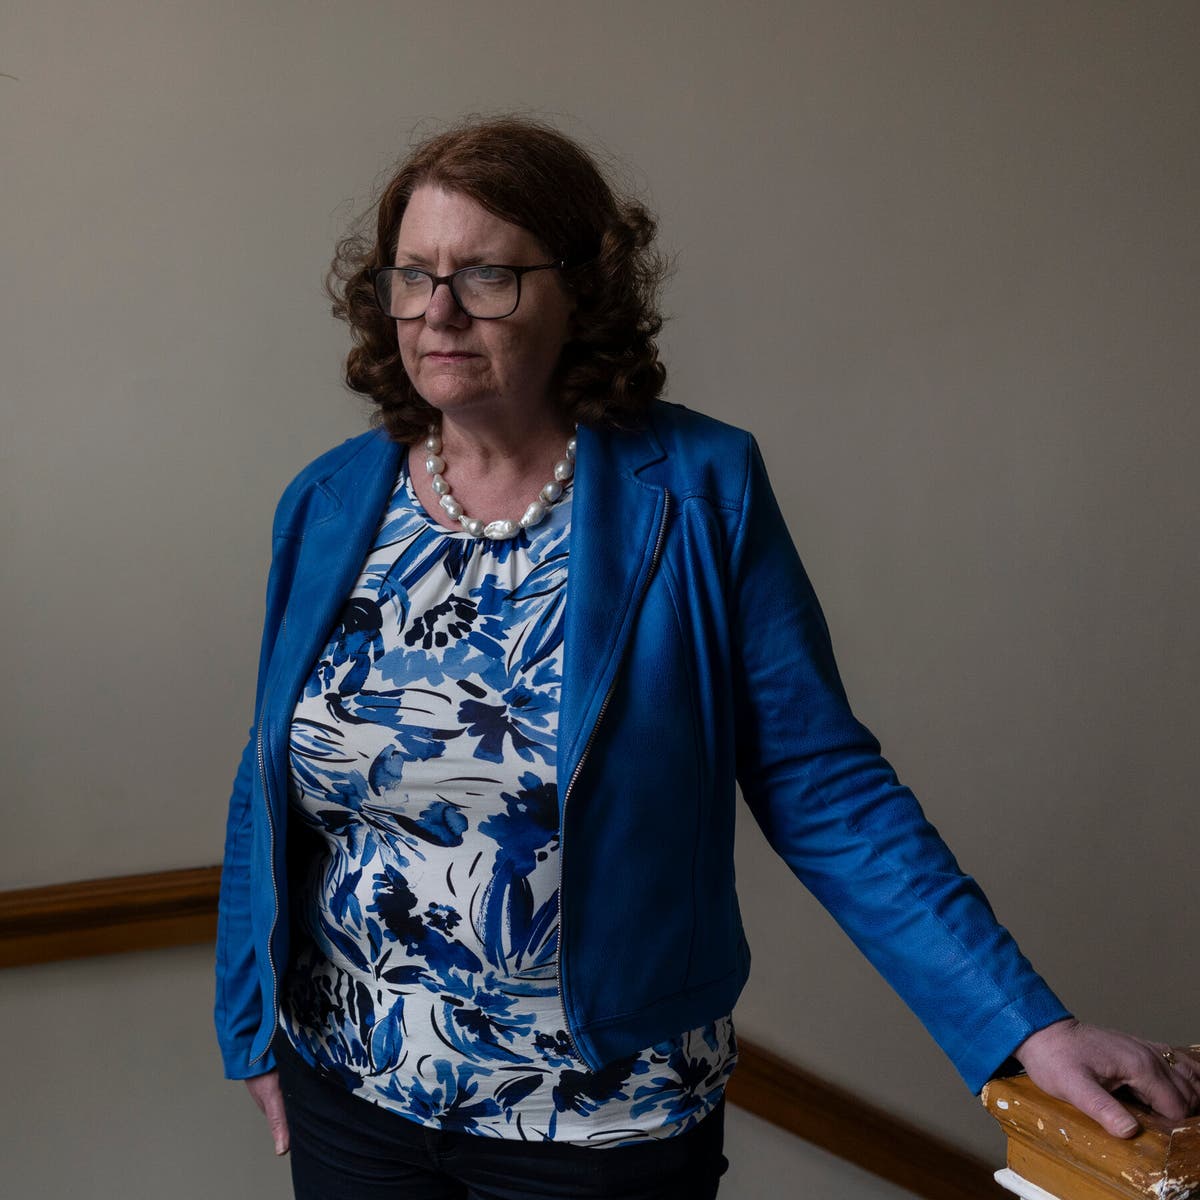 Sheila Gilheany, the chief executive of Alcohol Action #Ireland, called the labeling requirement “the most contested piece of legislation in Irish history.”
Credit...Paulo Nunes dos Santos for The New York Times

#LiquorPolicyScam 
#liquoreconomy